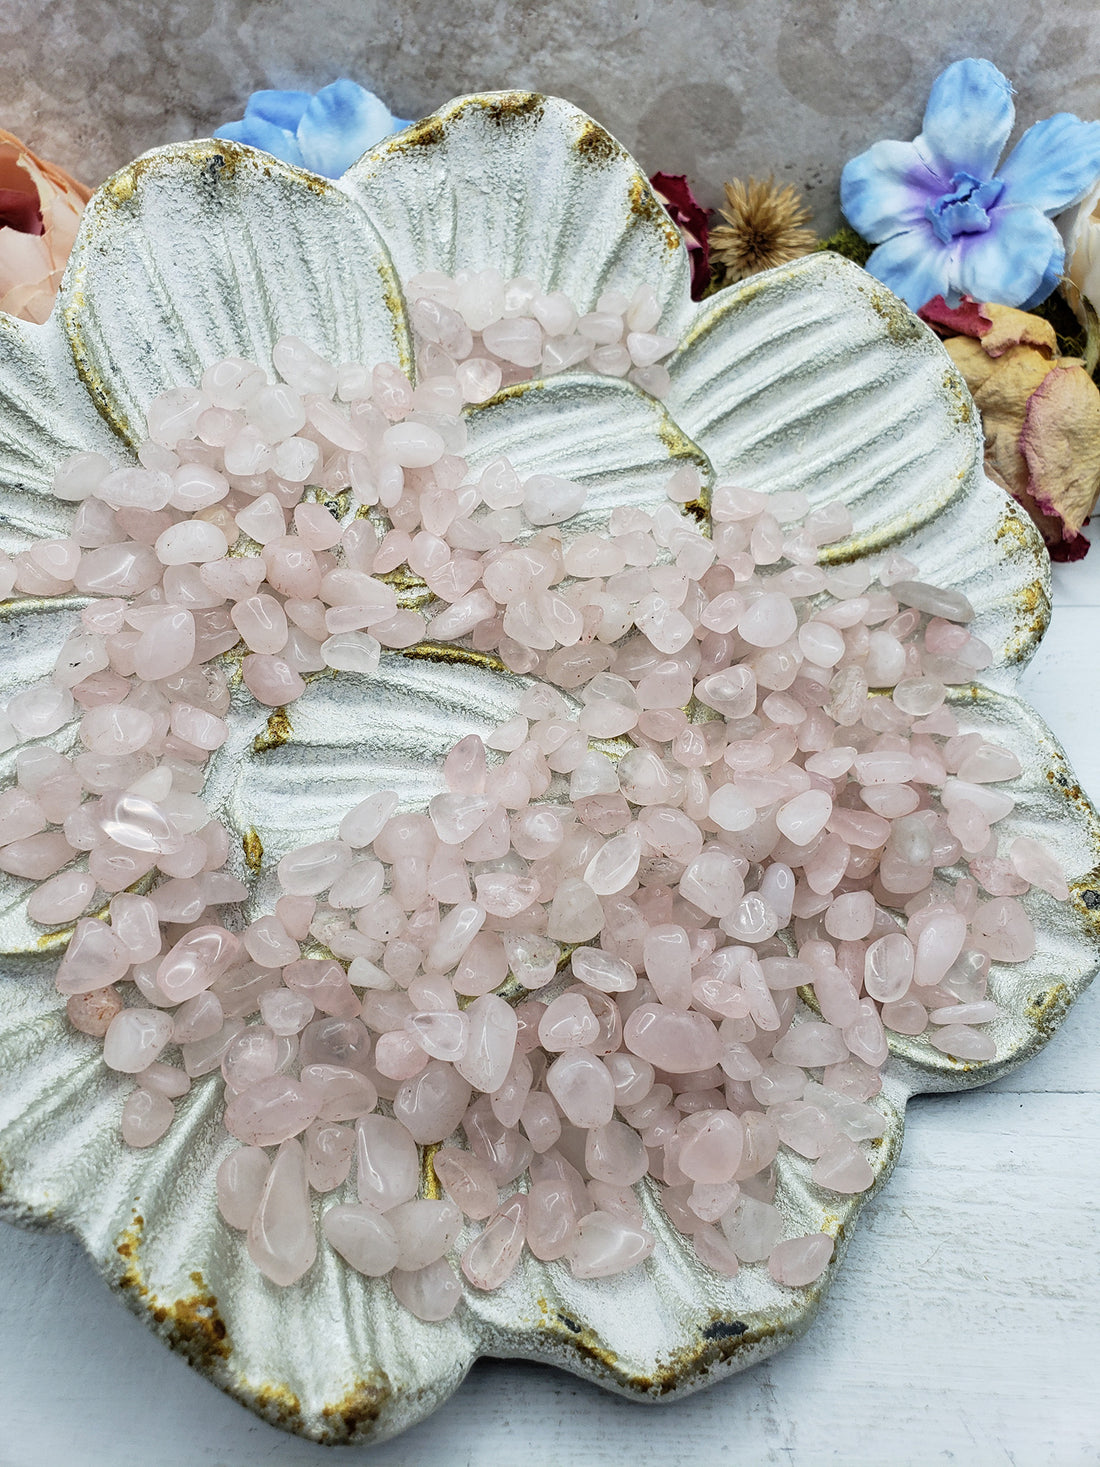 seven ounces of rose quartz chips on floral dish display